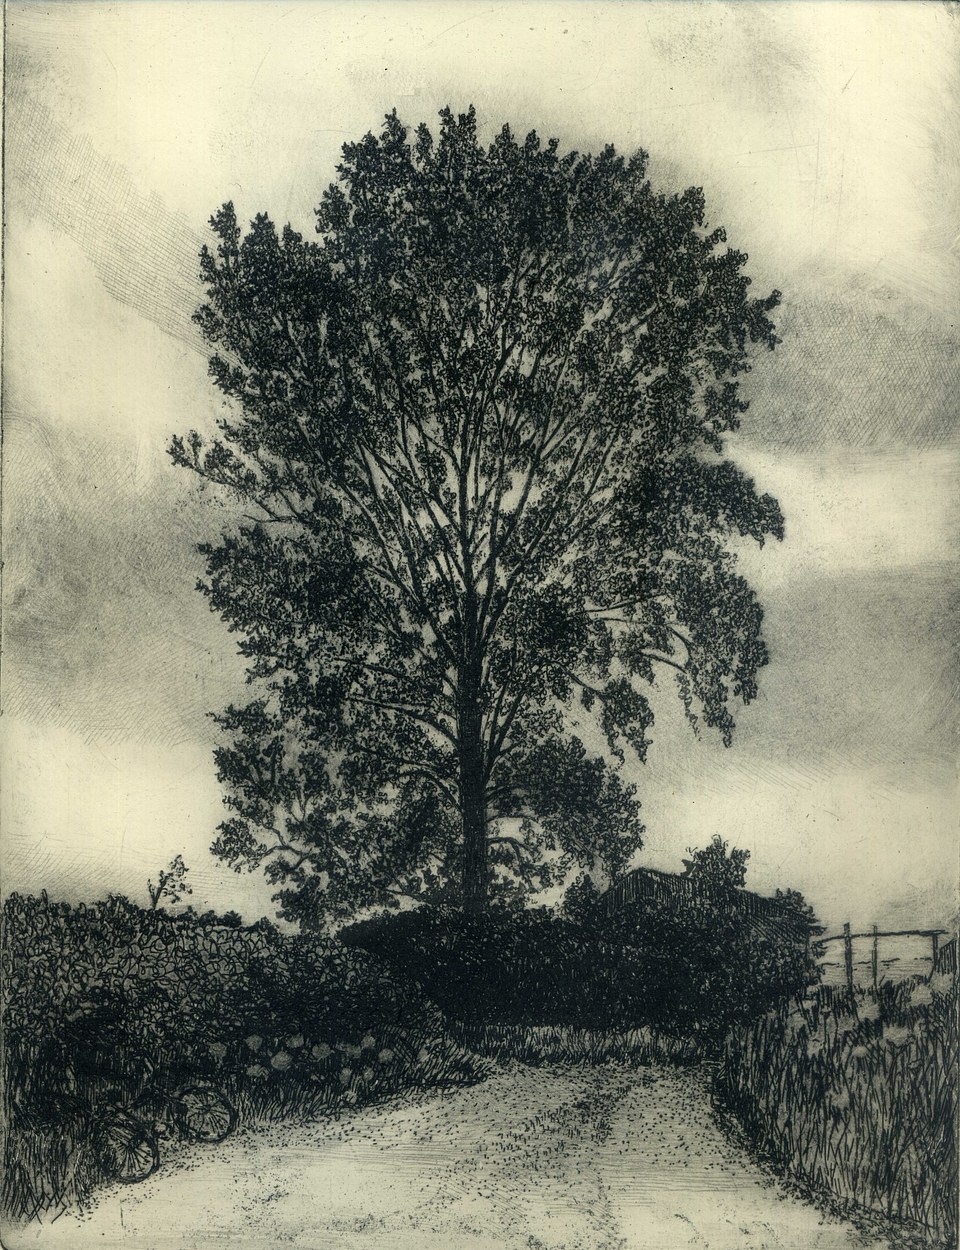 Near Babcary, etching, 15 x 21 cm (image size), edition of 50, £125